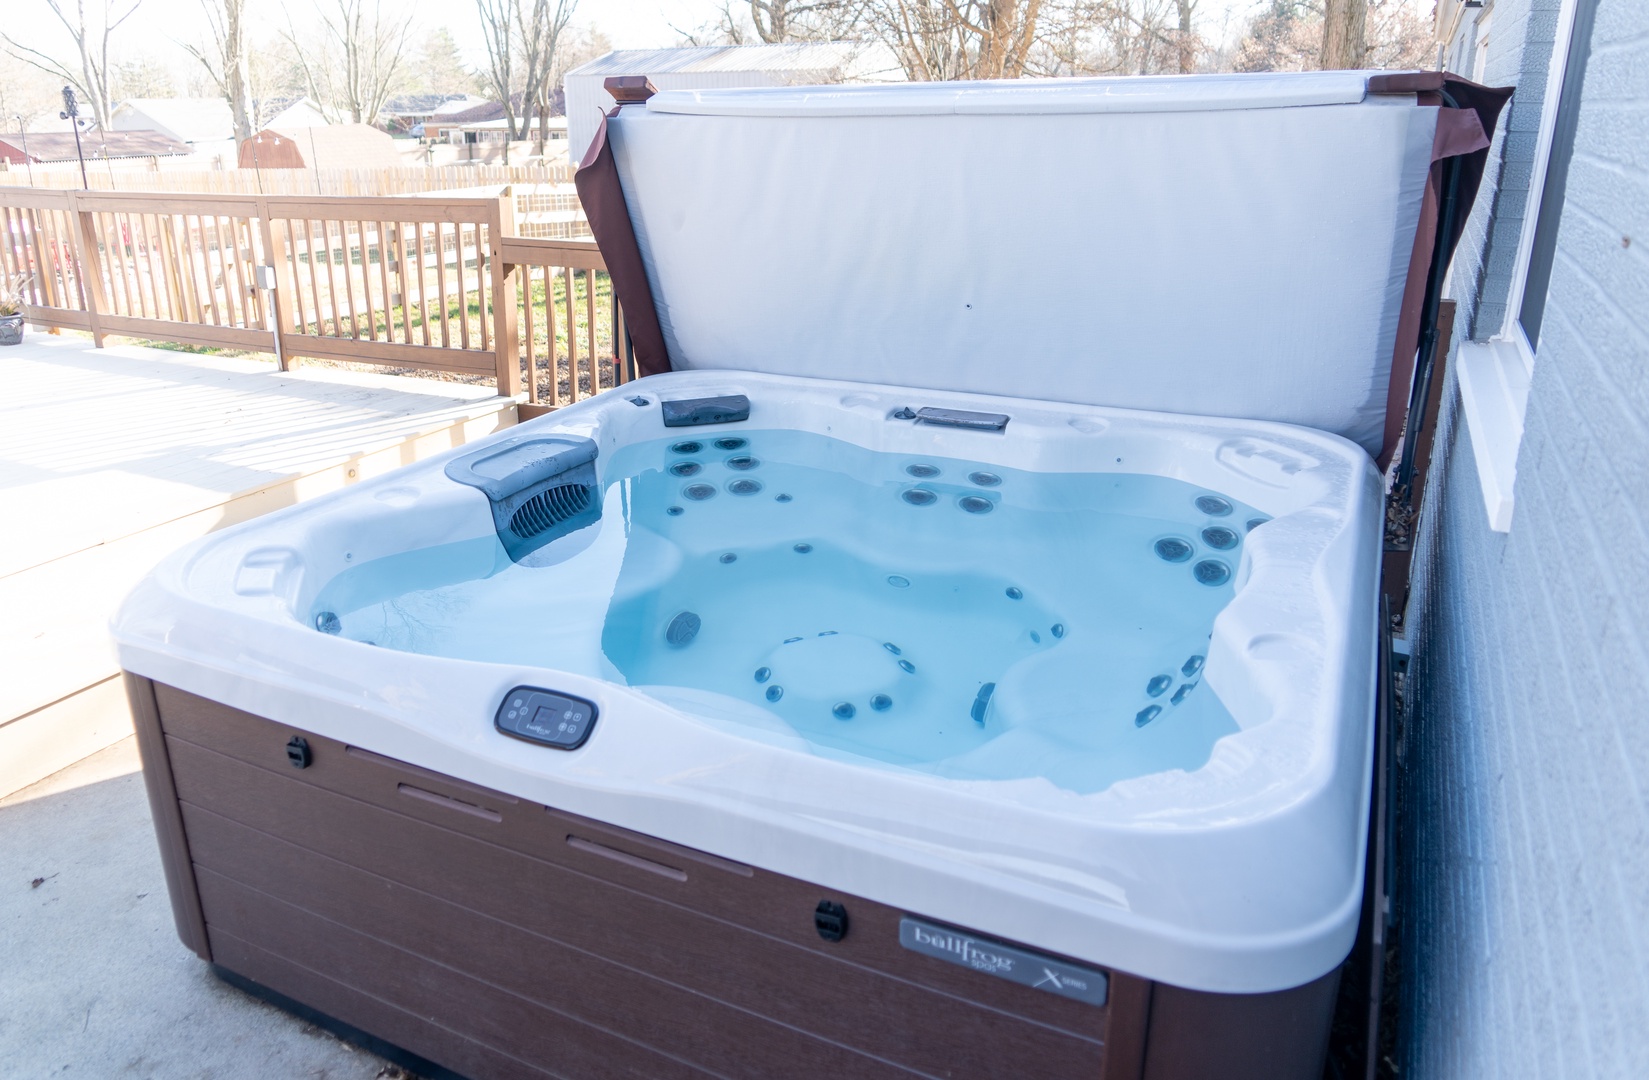 Soak all your cares away in the seasonal private hot tub